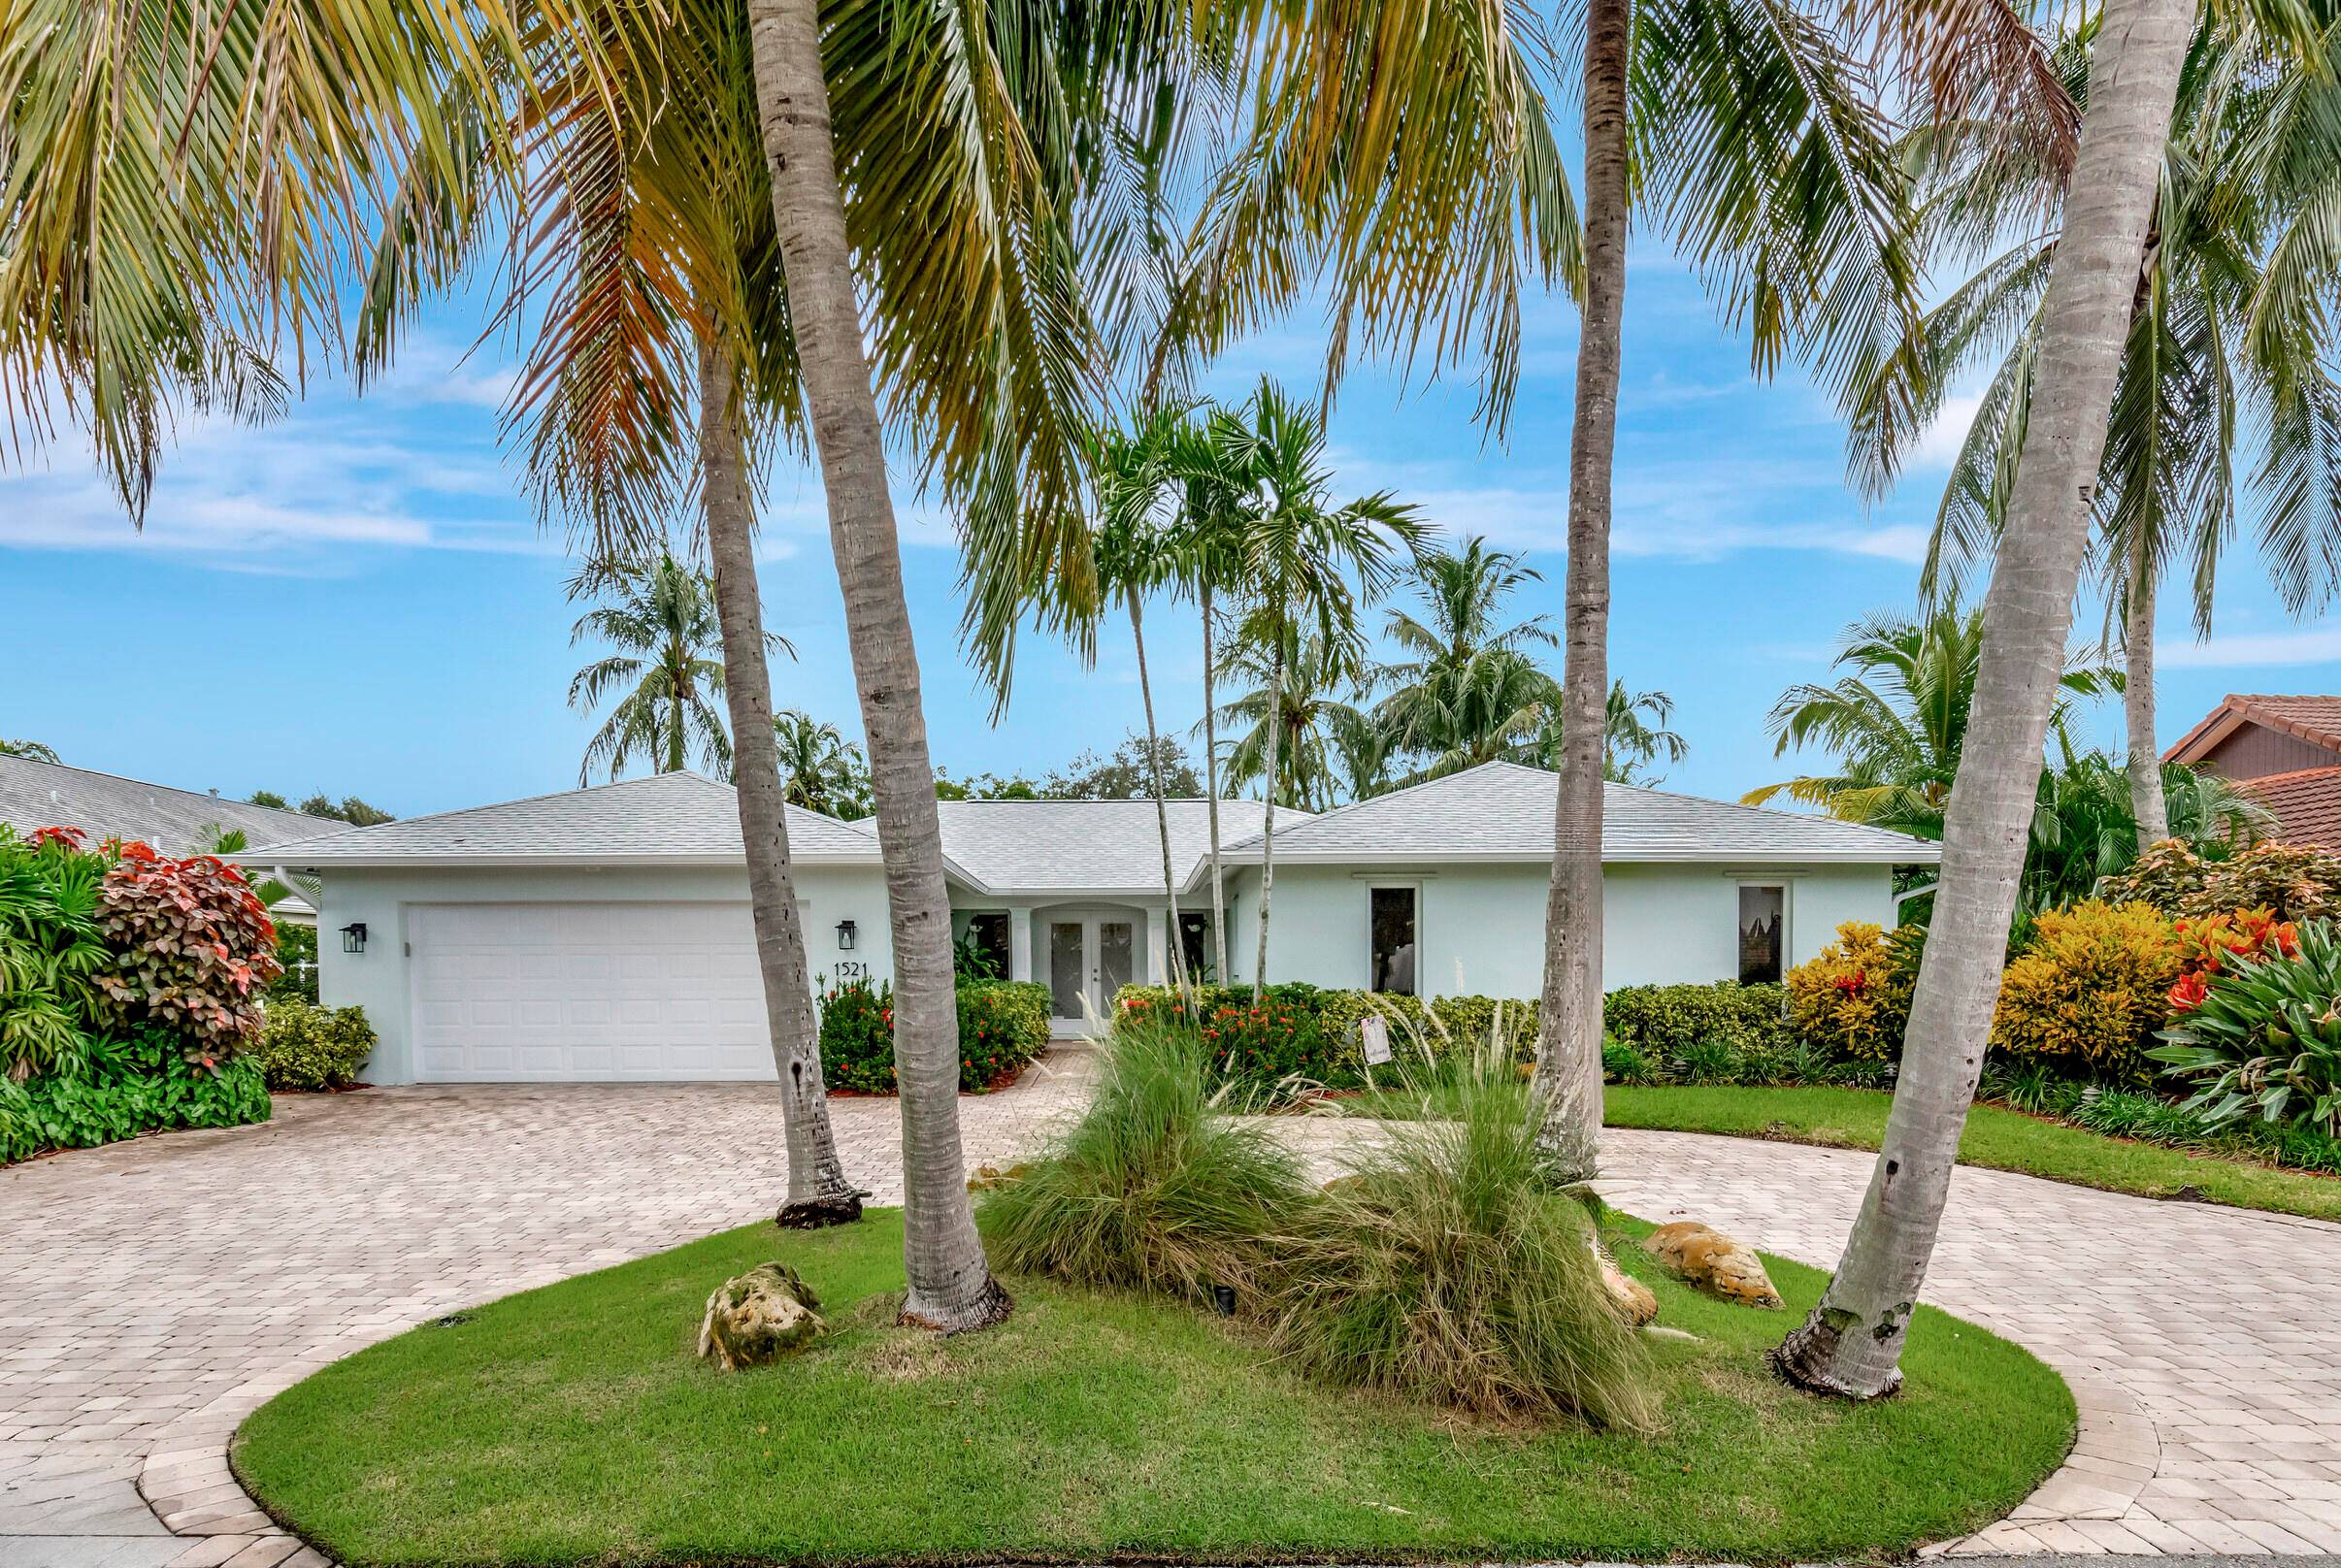 Beautiful and spacious 5 bedroom, 3 and a half bath, 2 car garage home with nearly 2, 800 living sf located in the highly desirable Palm Beach Farms.